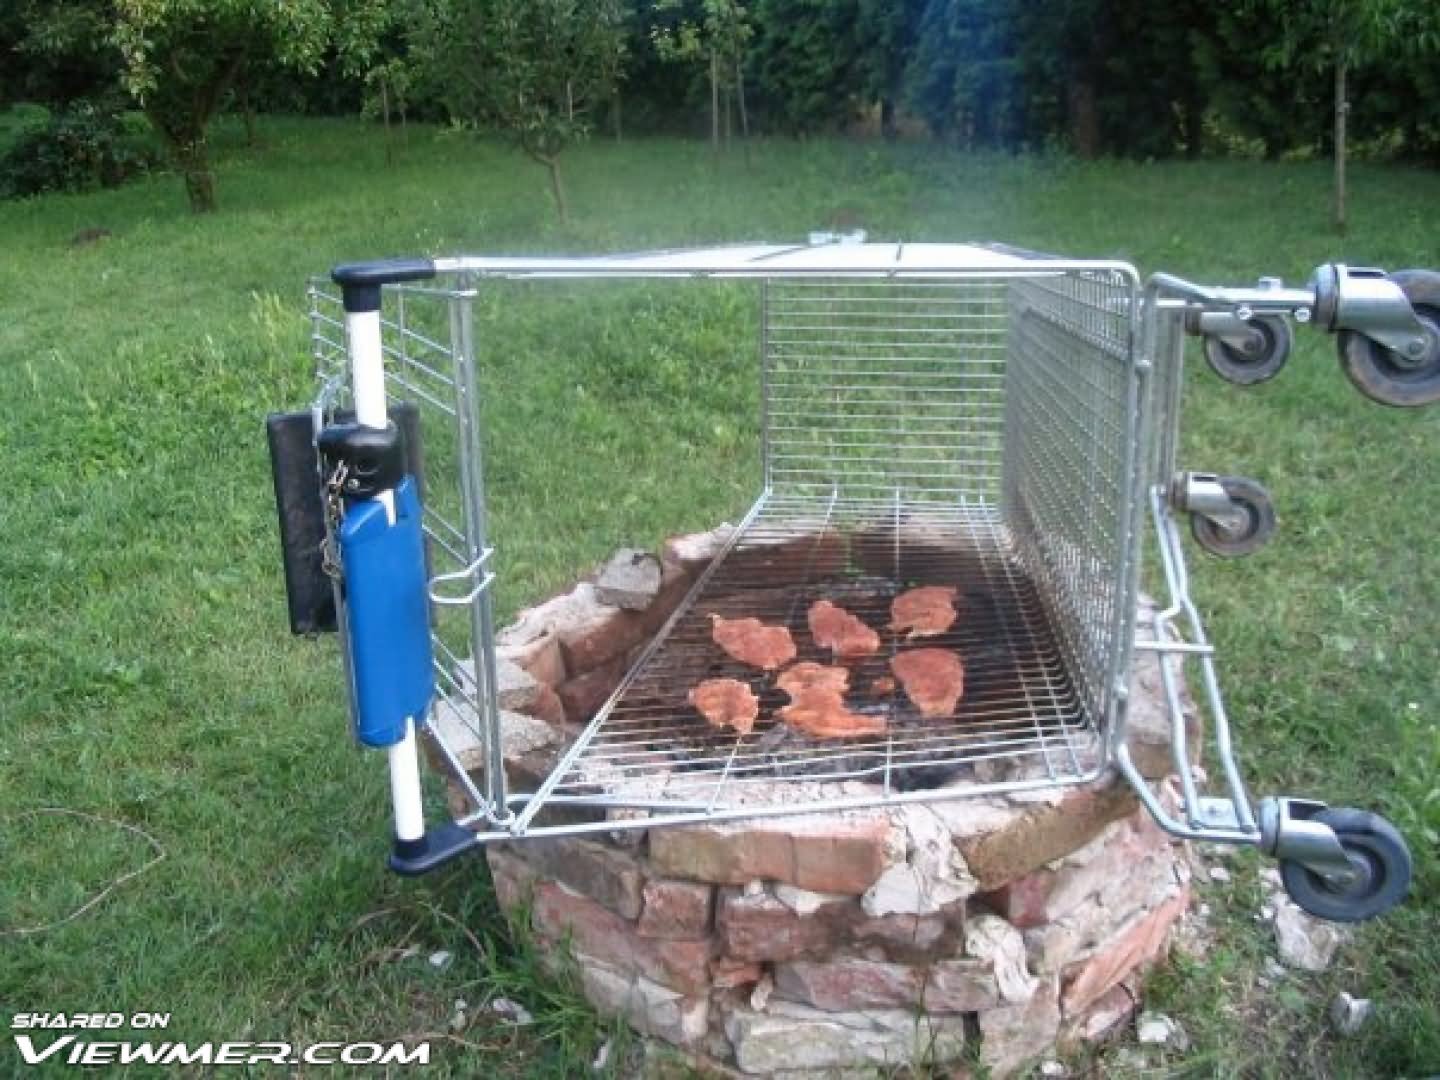 Chicken Roasted On Funny Shopping Trolley Grill Image